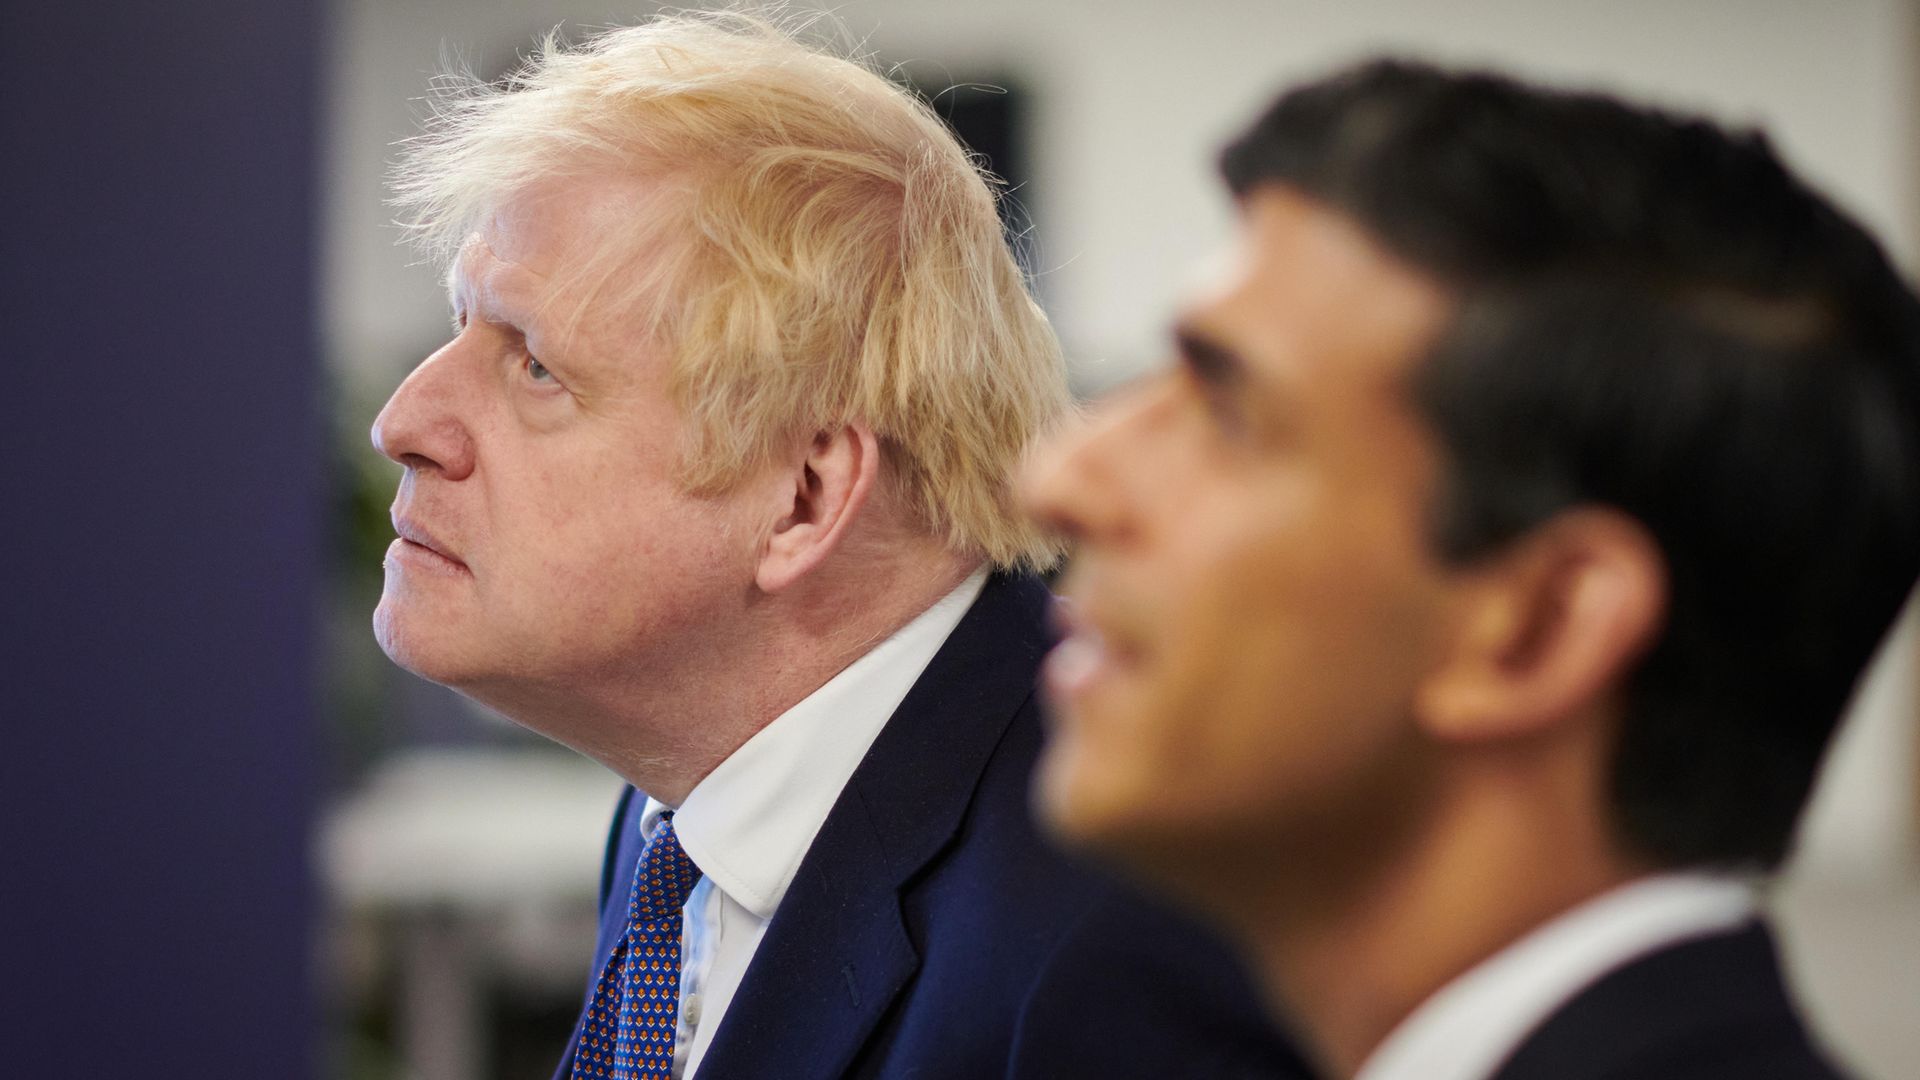 Prime minister Boris Johnson and chancellor Rishi Sunak during a visit to the headquarters of Octopus Energy in London - Credit: PA